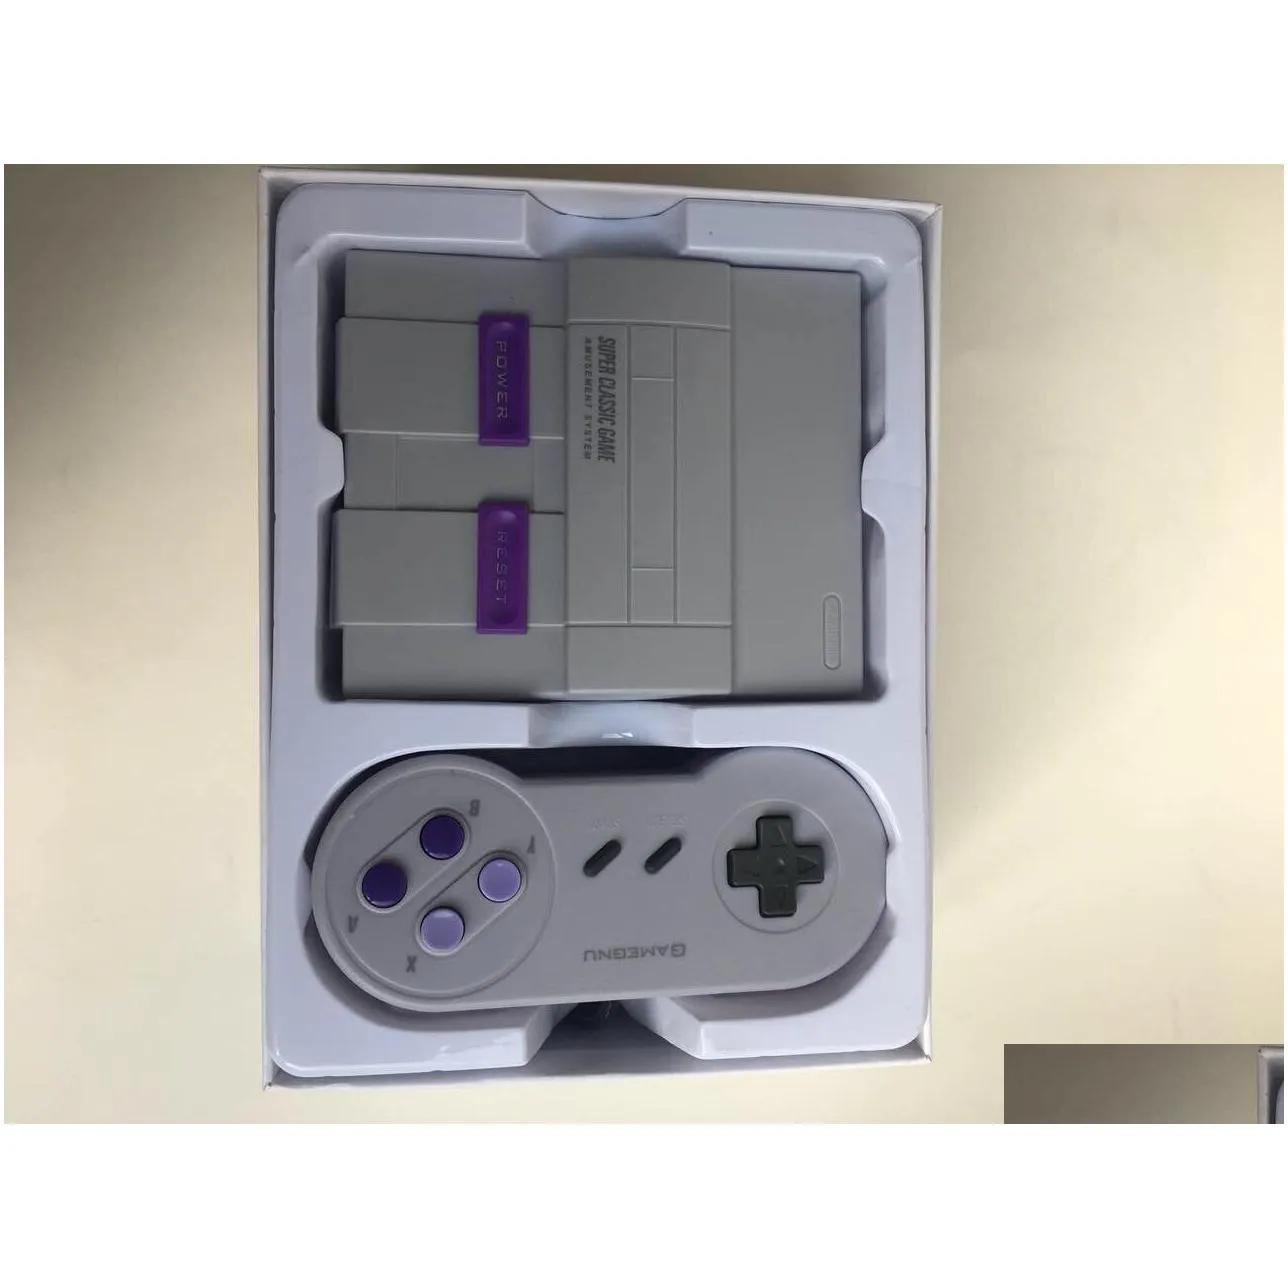 super classic sfc tv handheld mini portable game players consoles entertainment system for 660 nes snes games console